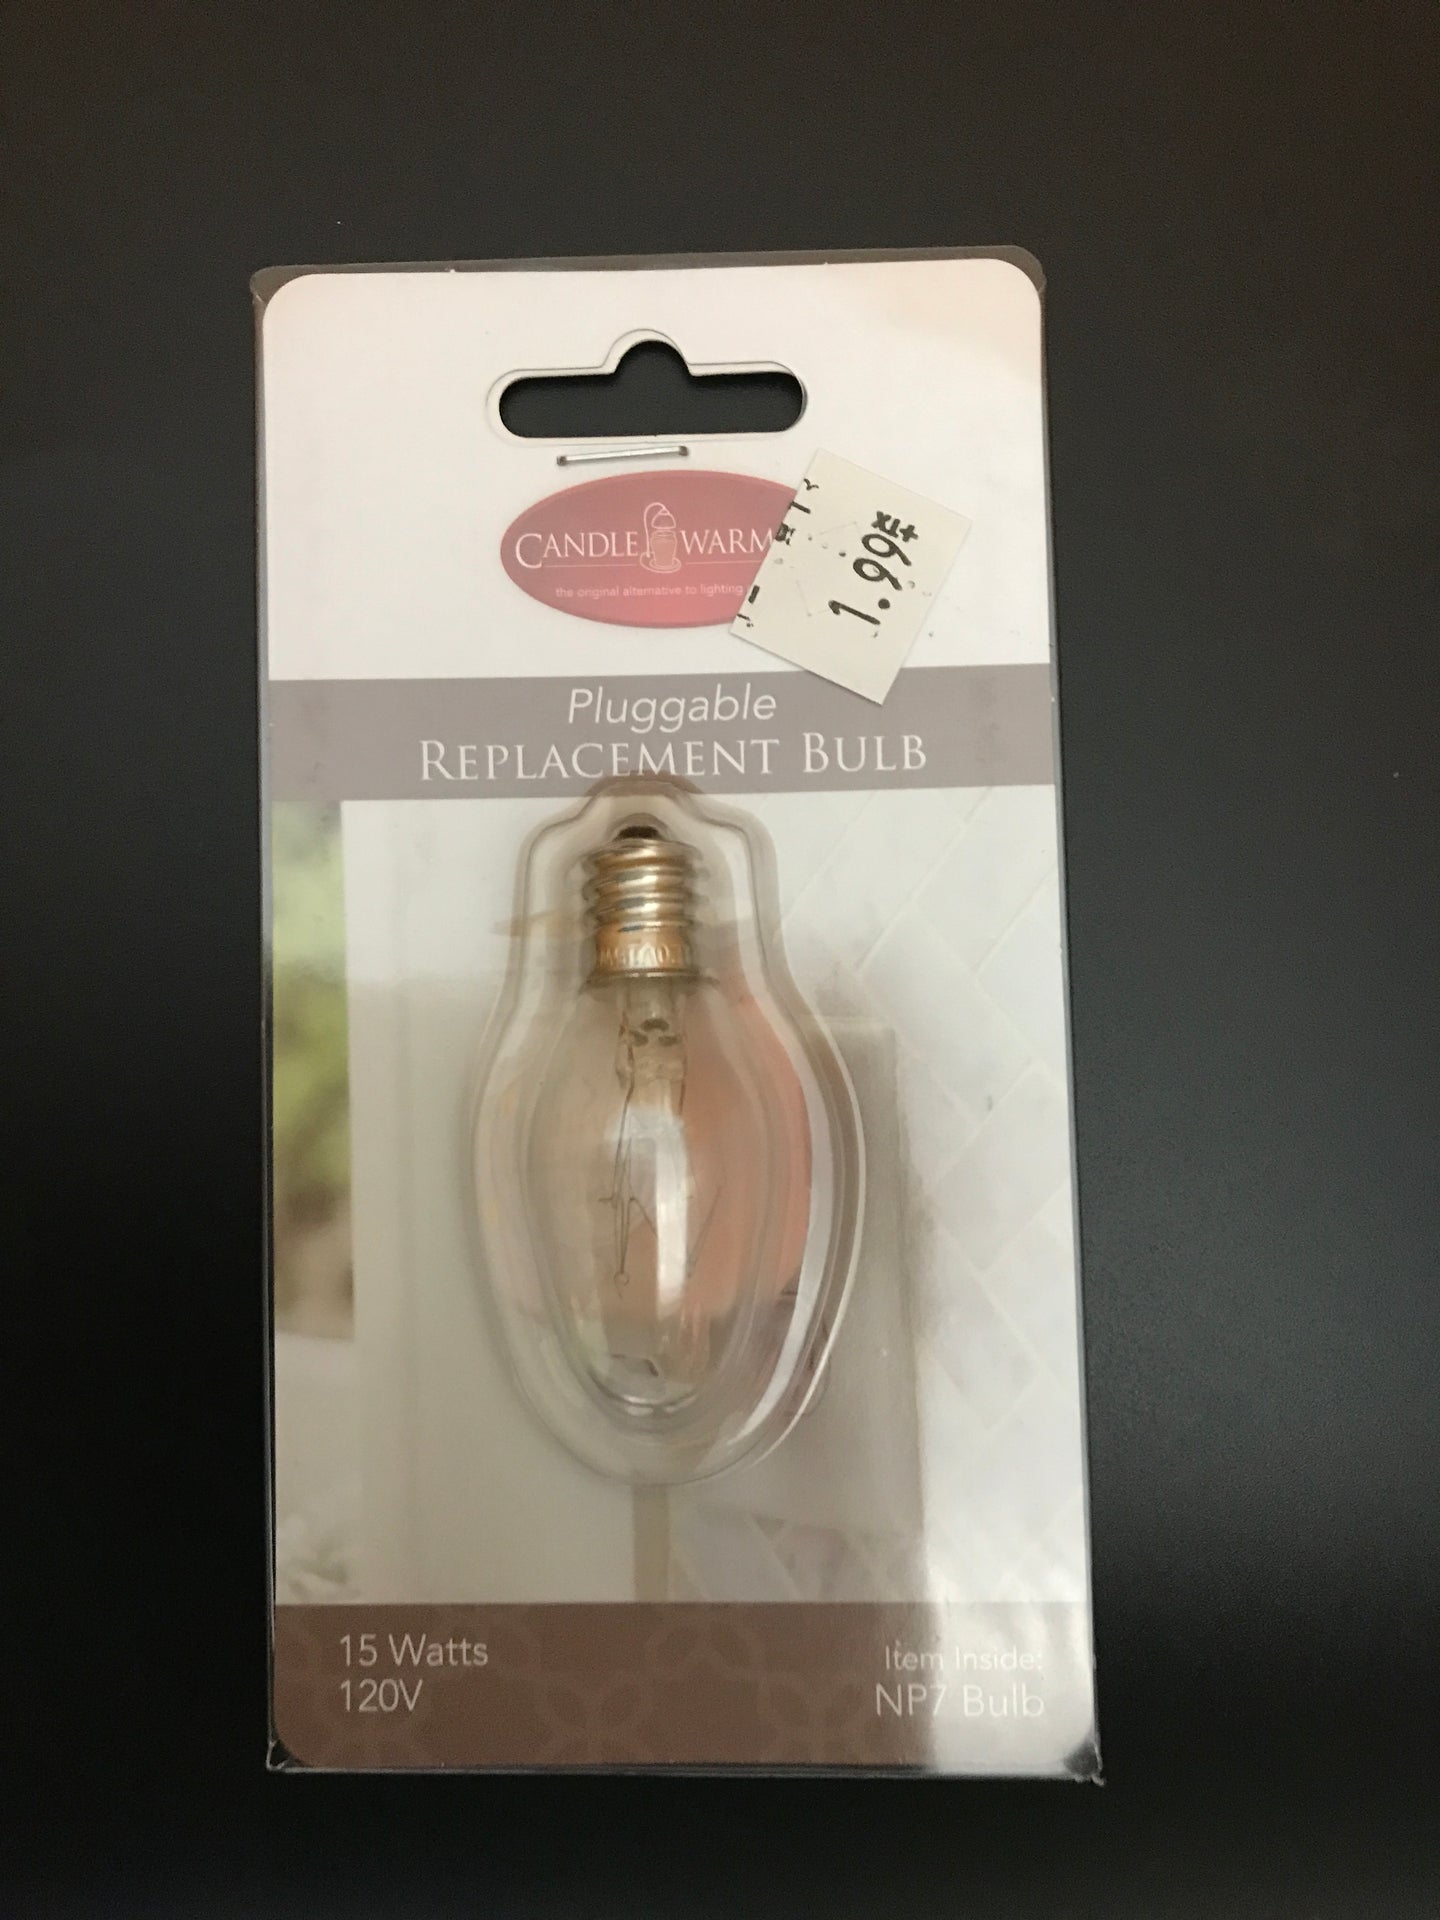 Plug-in Warmer- Replacement Bulb